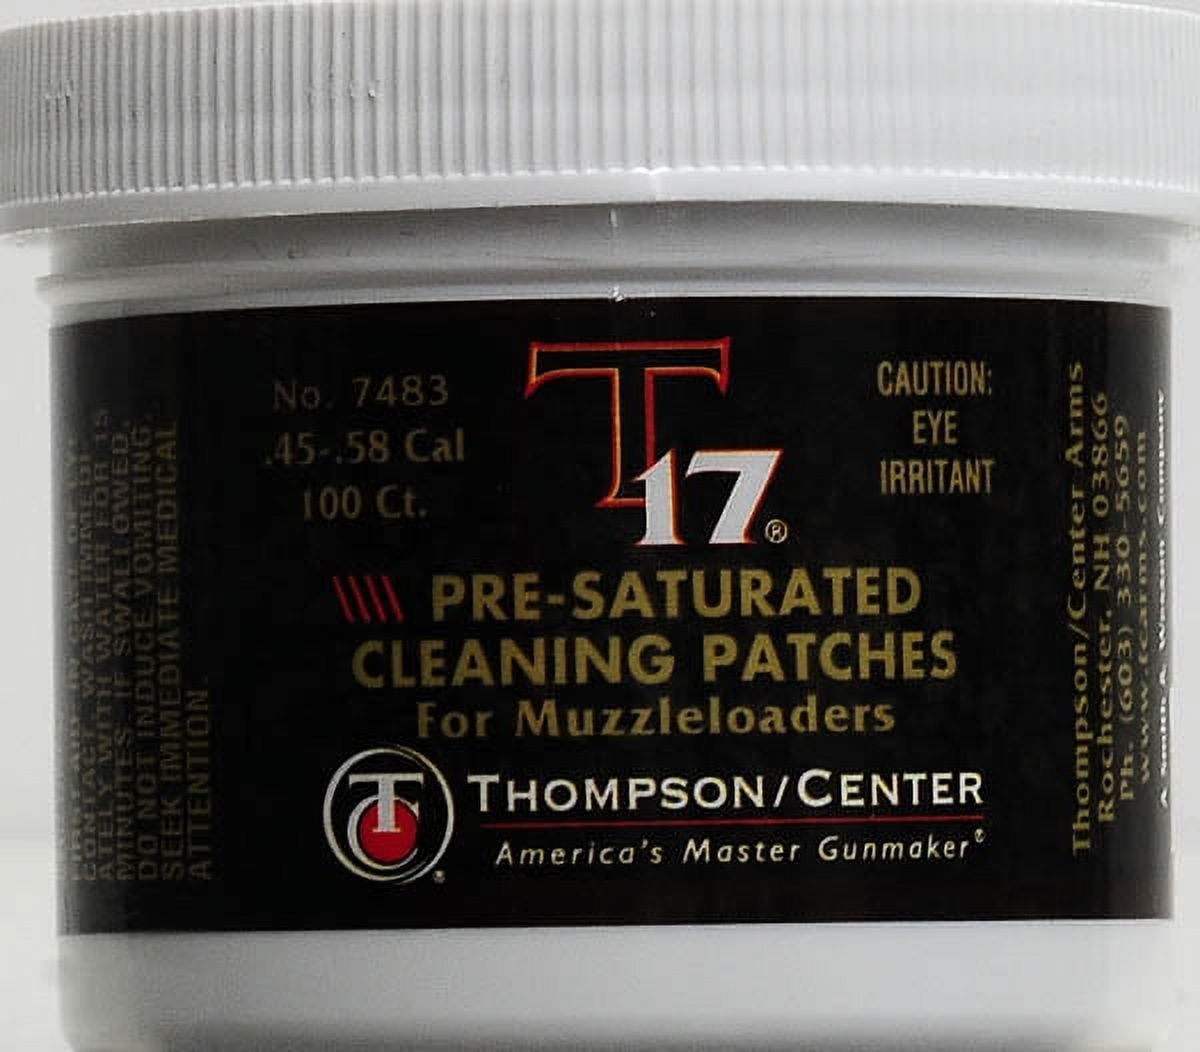 T17 Blackpowder Cleaning Kit